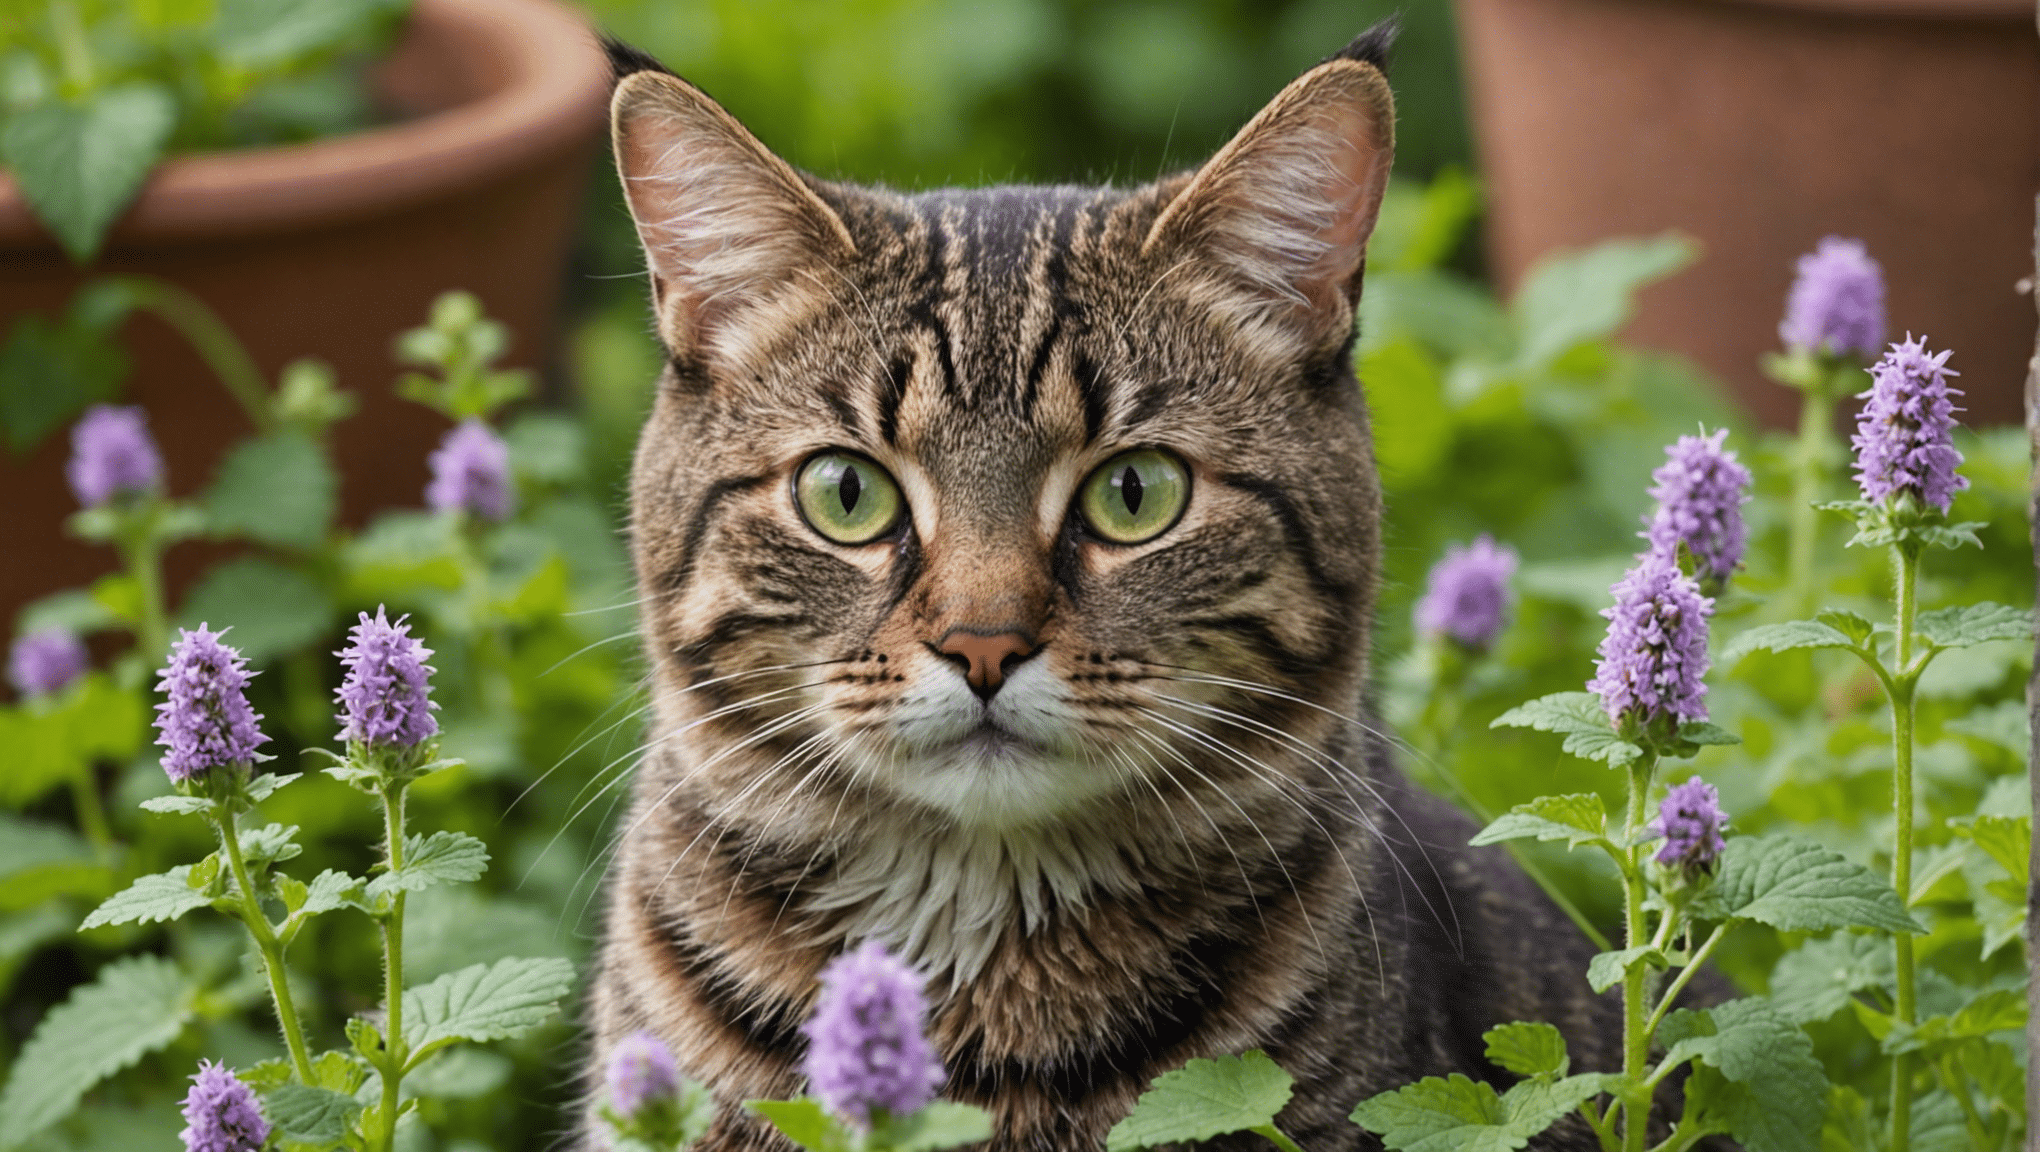 learn how to plant catnip seeds with our step-by-step guide. discover the best planting methods and care tips for growing healthy catnip plants in your garden.